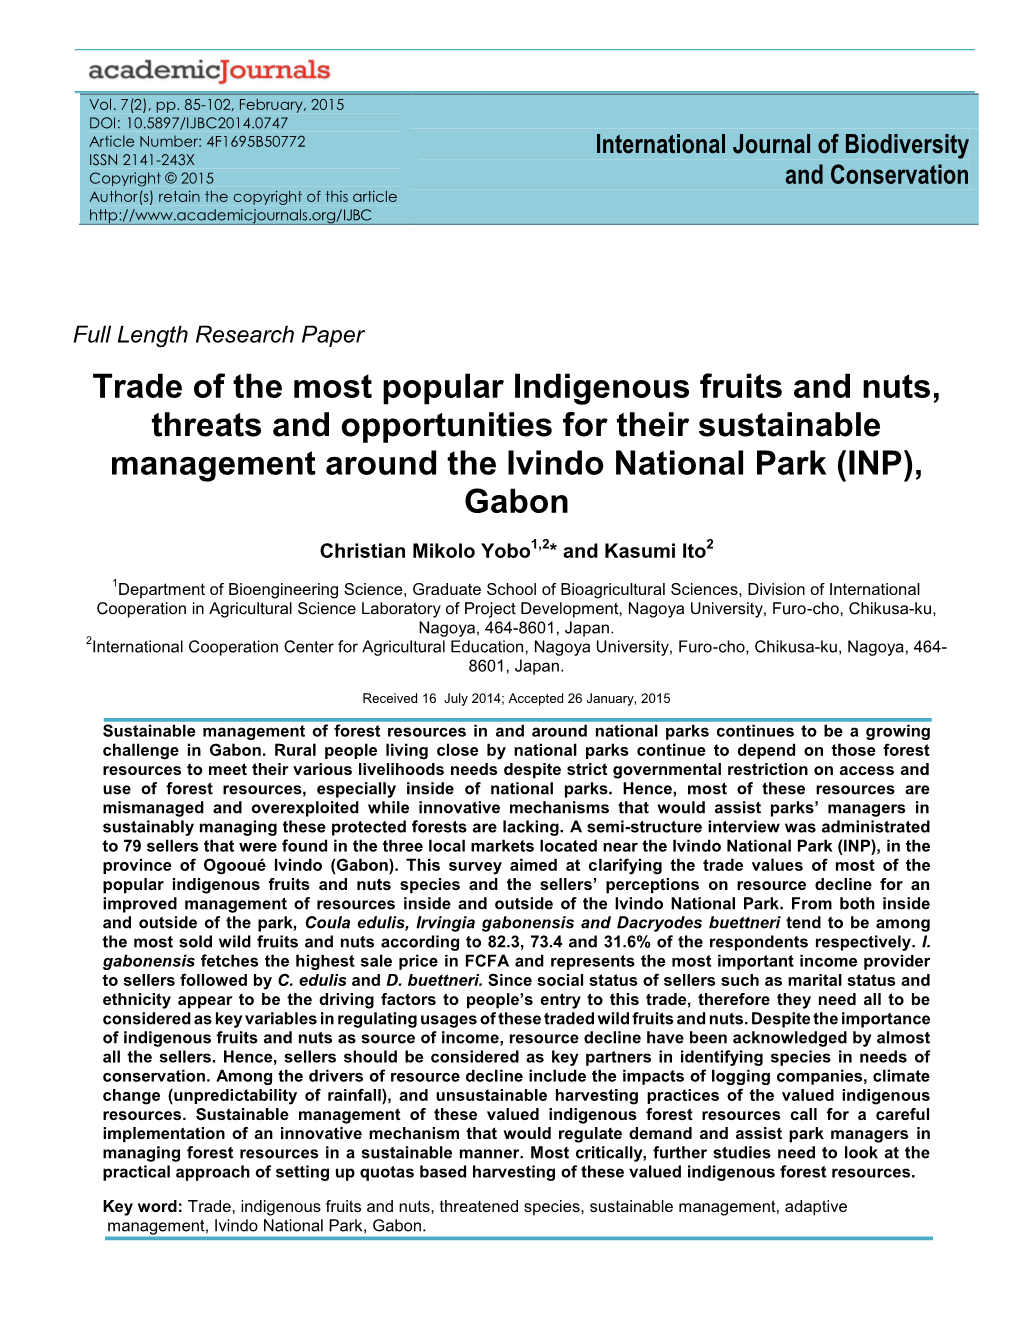 Trade of the Most Popular Indigenous Fruits and Nuts, Threats and Opportunities for Their Sustainable Management Around the Ivindo National Park (INP), Gabon